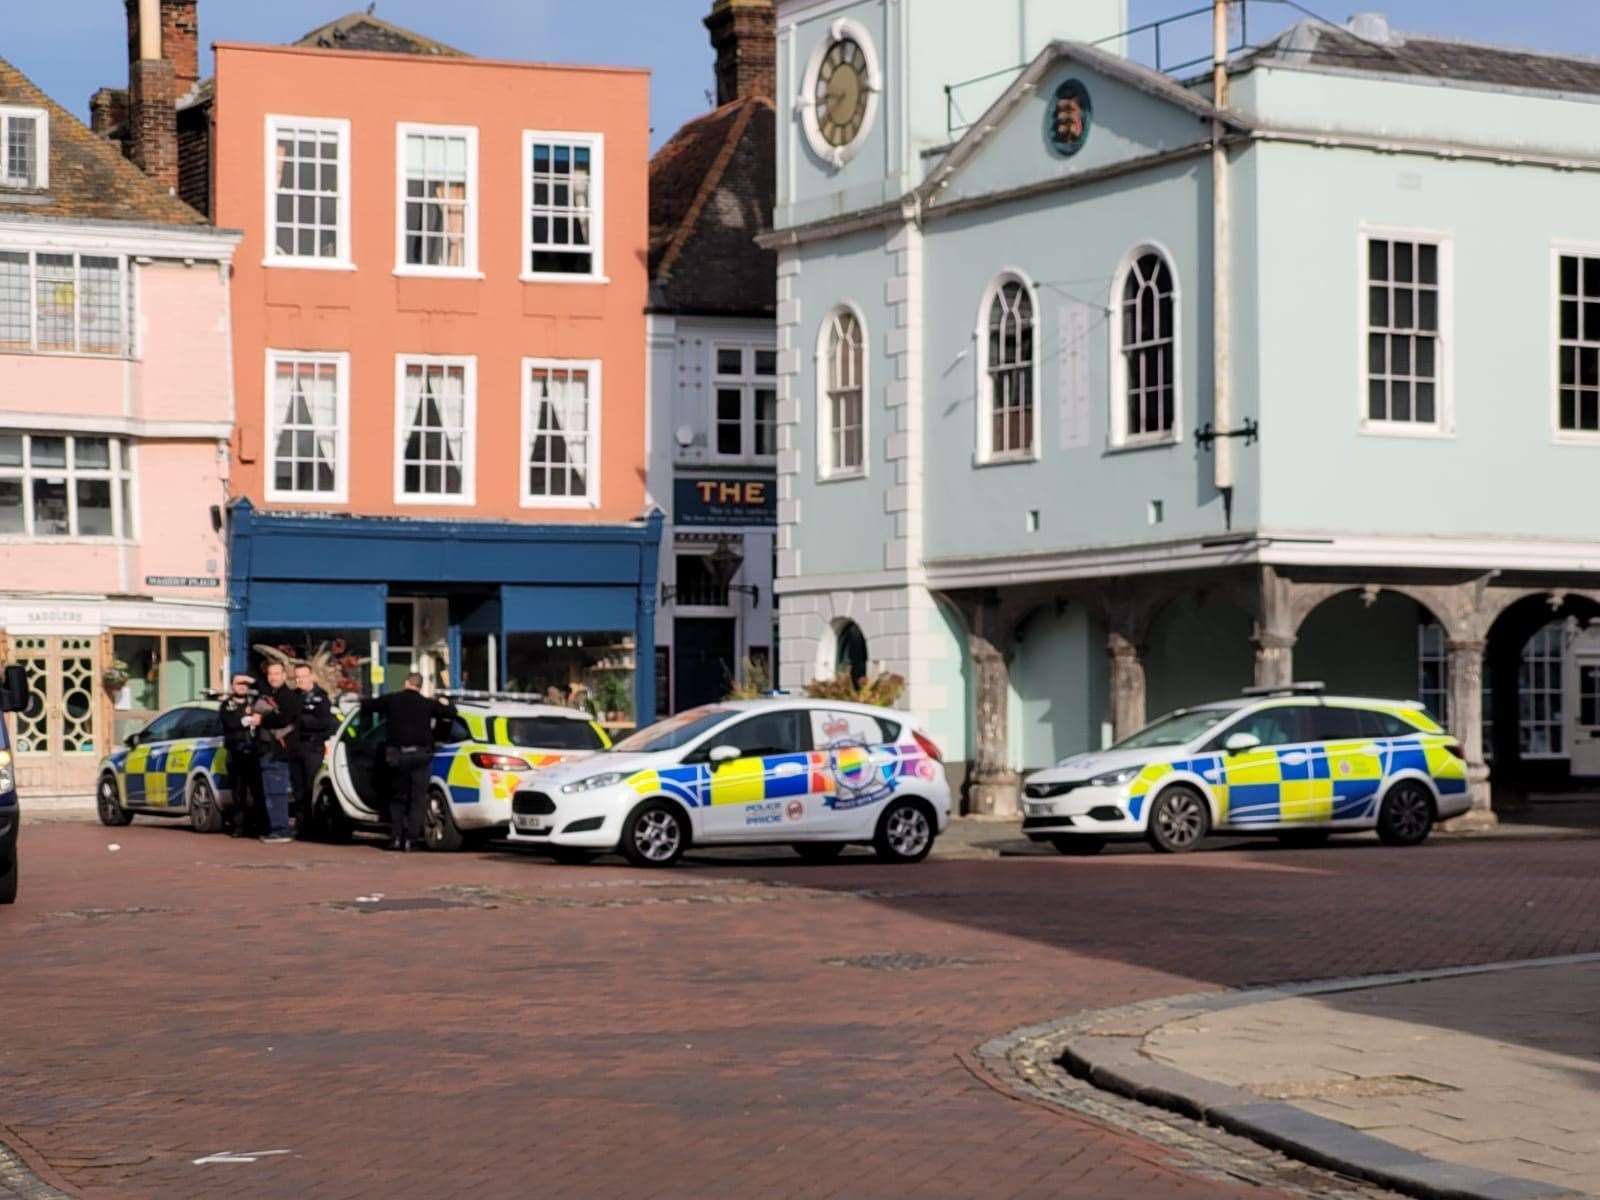 Police in Faversham town centre